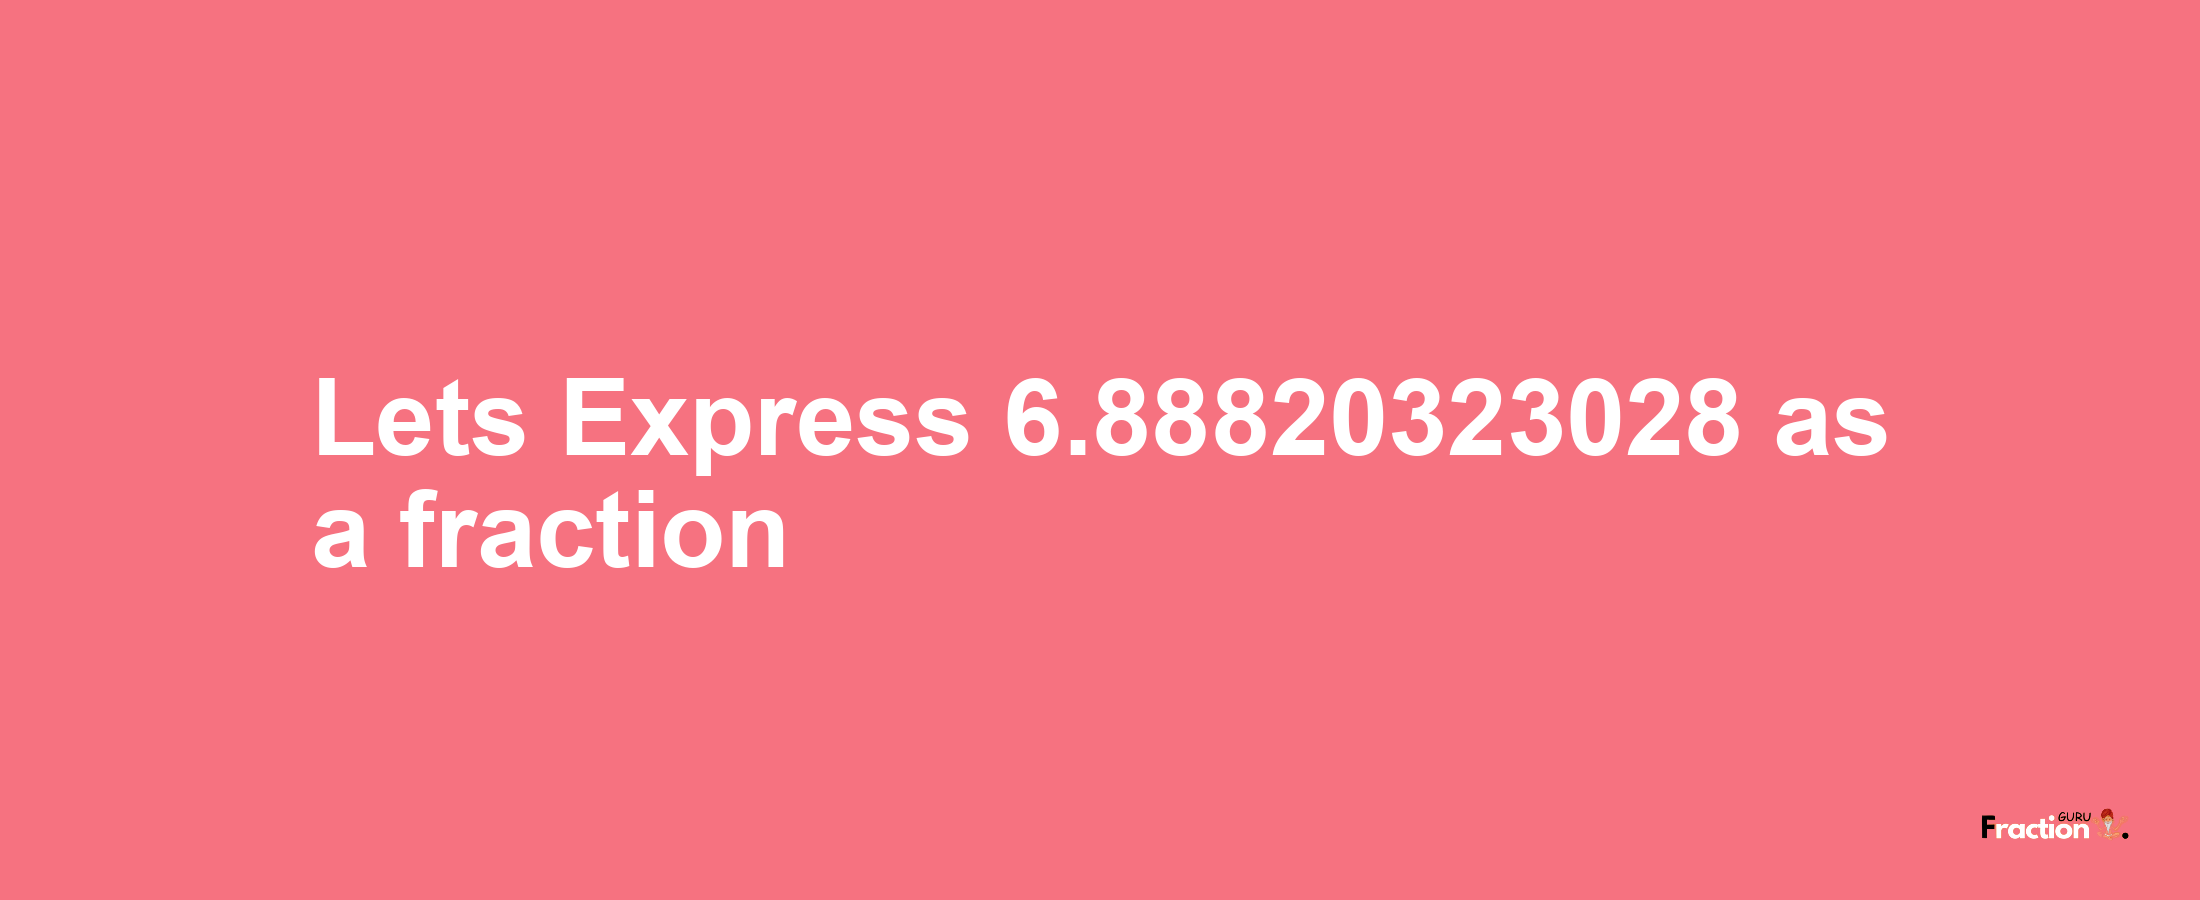 Lets Express 6.88820323028 as afraction